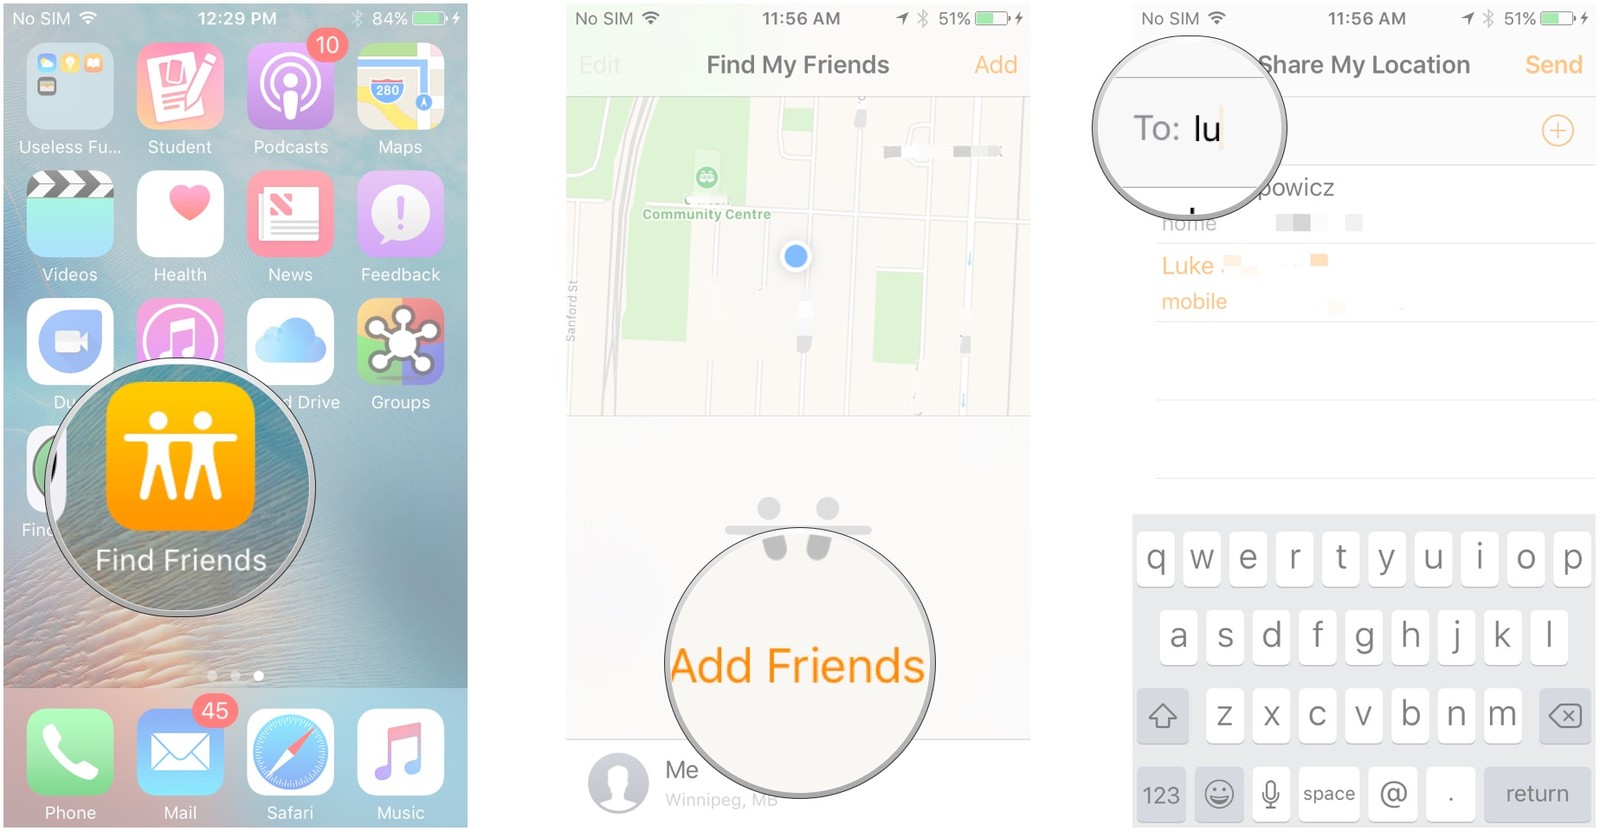 Part 3: How to see someone's iPhone location through Friend My Friend